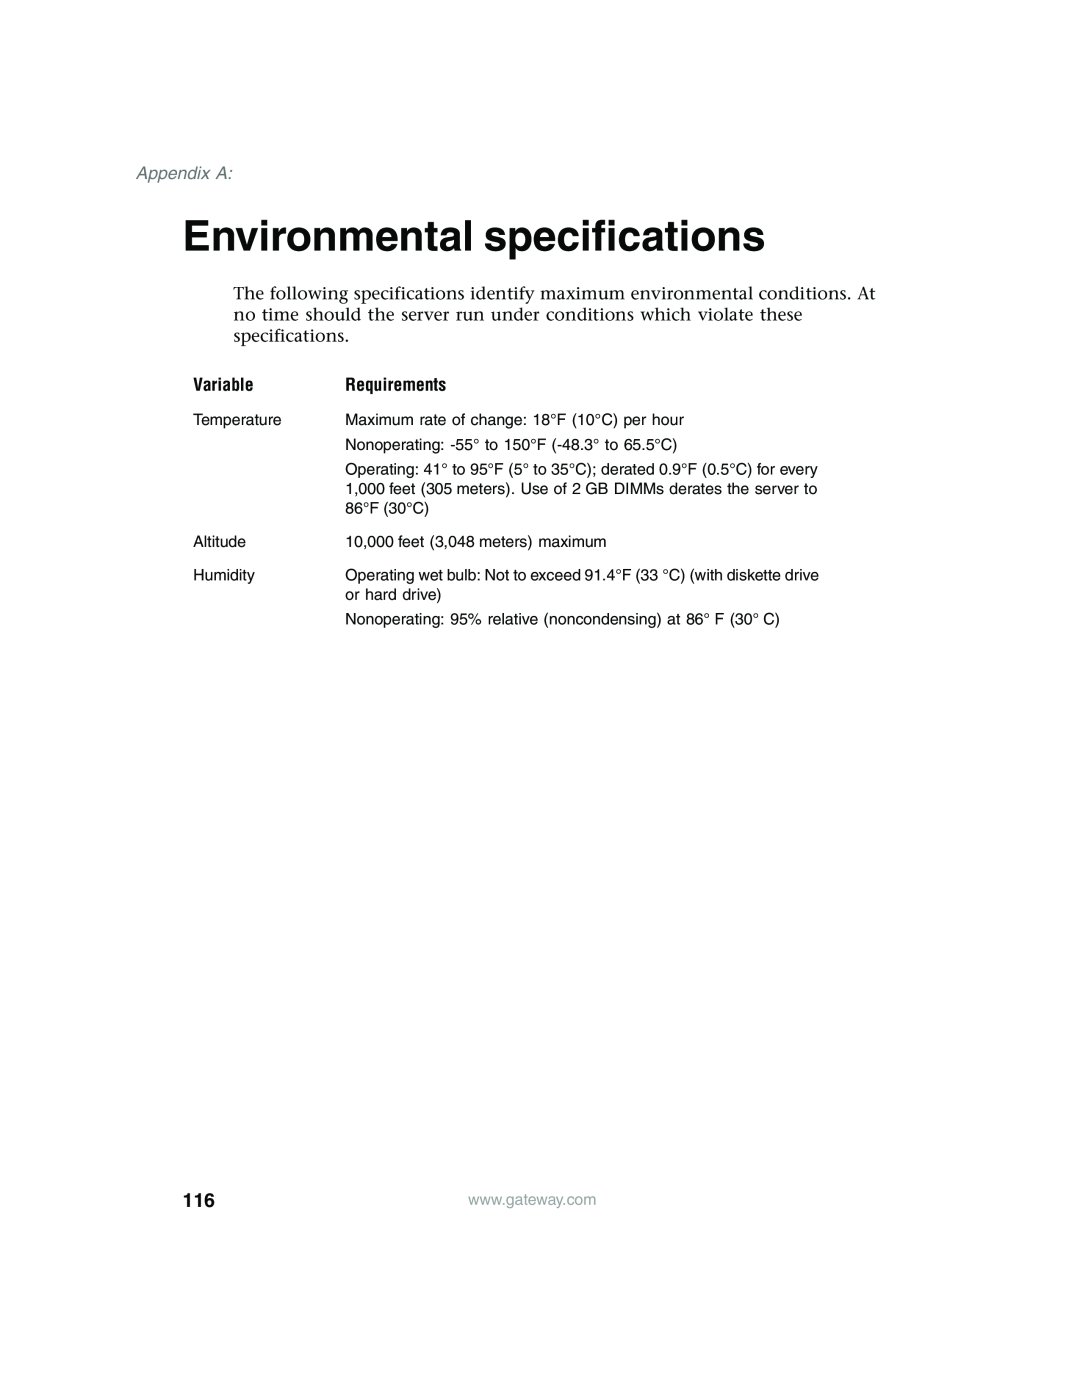 Gateway 955 manual Environmental specifications, Variable, Requirements, Appendix A 